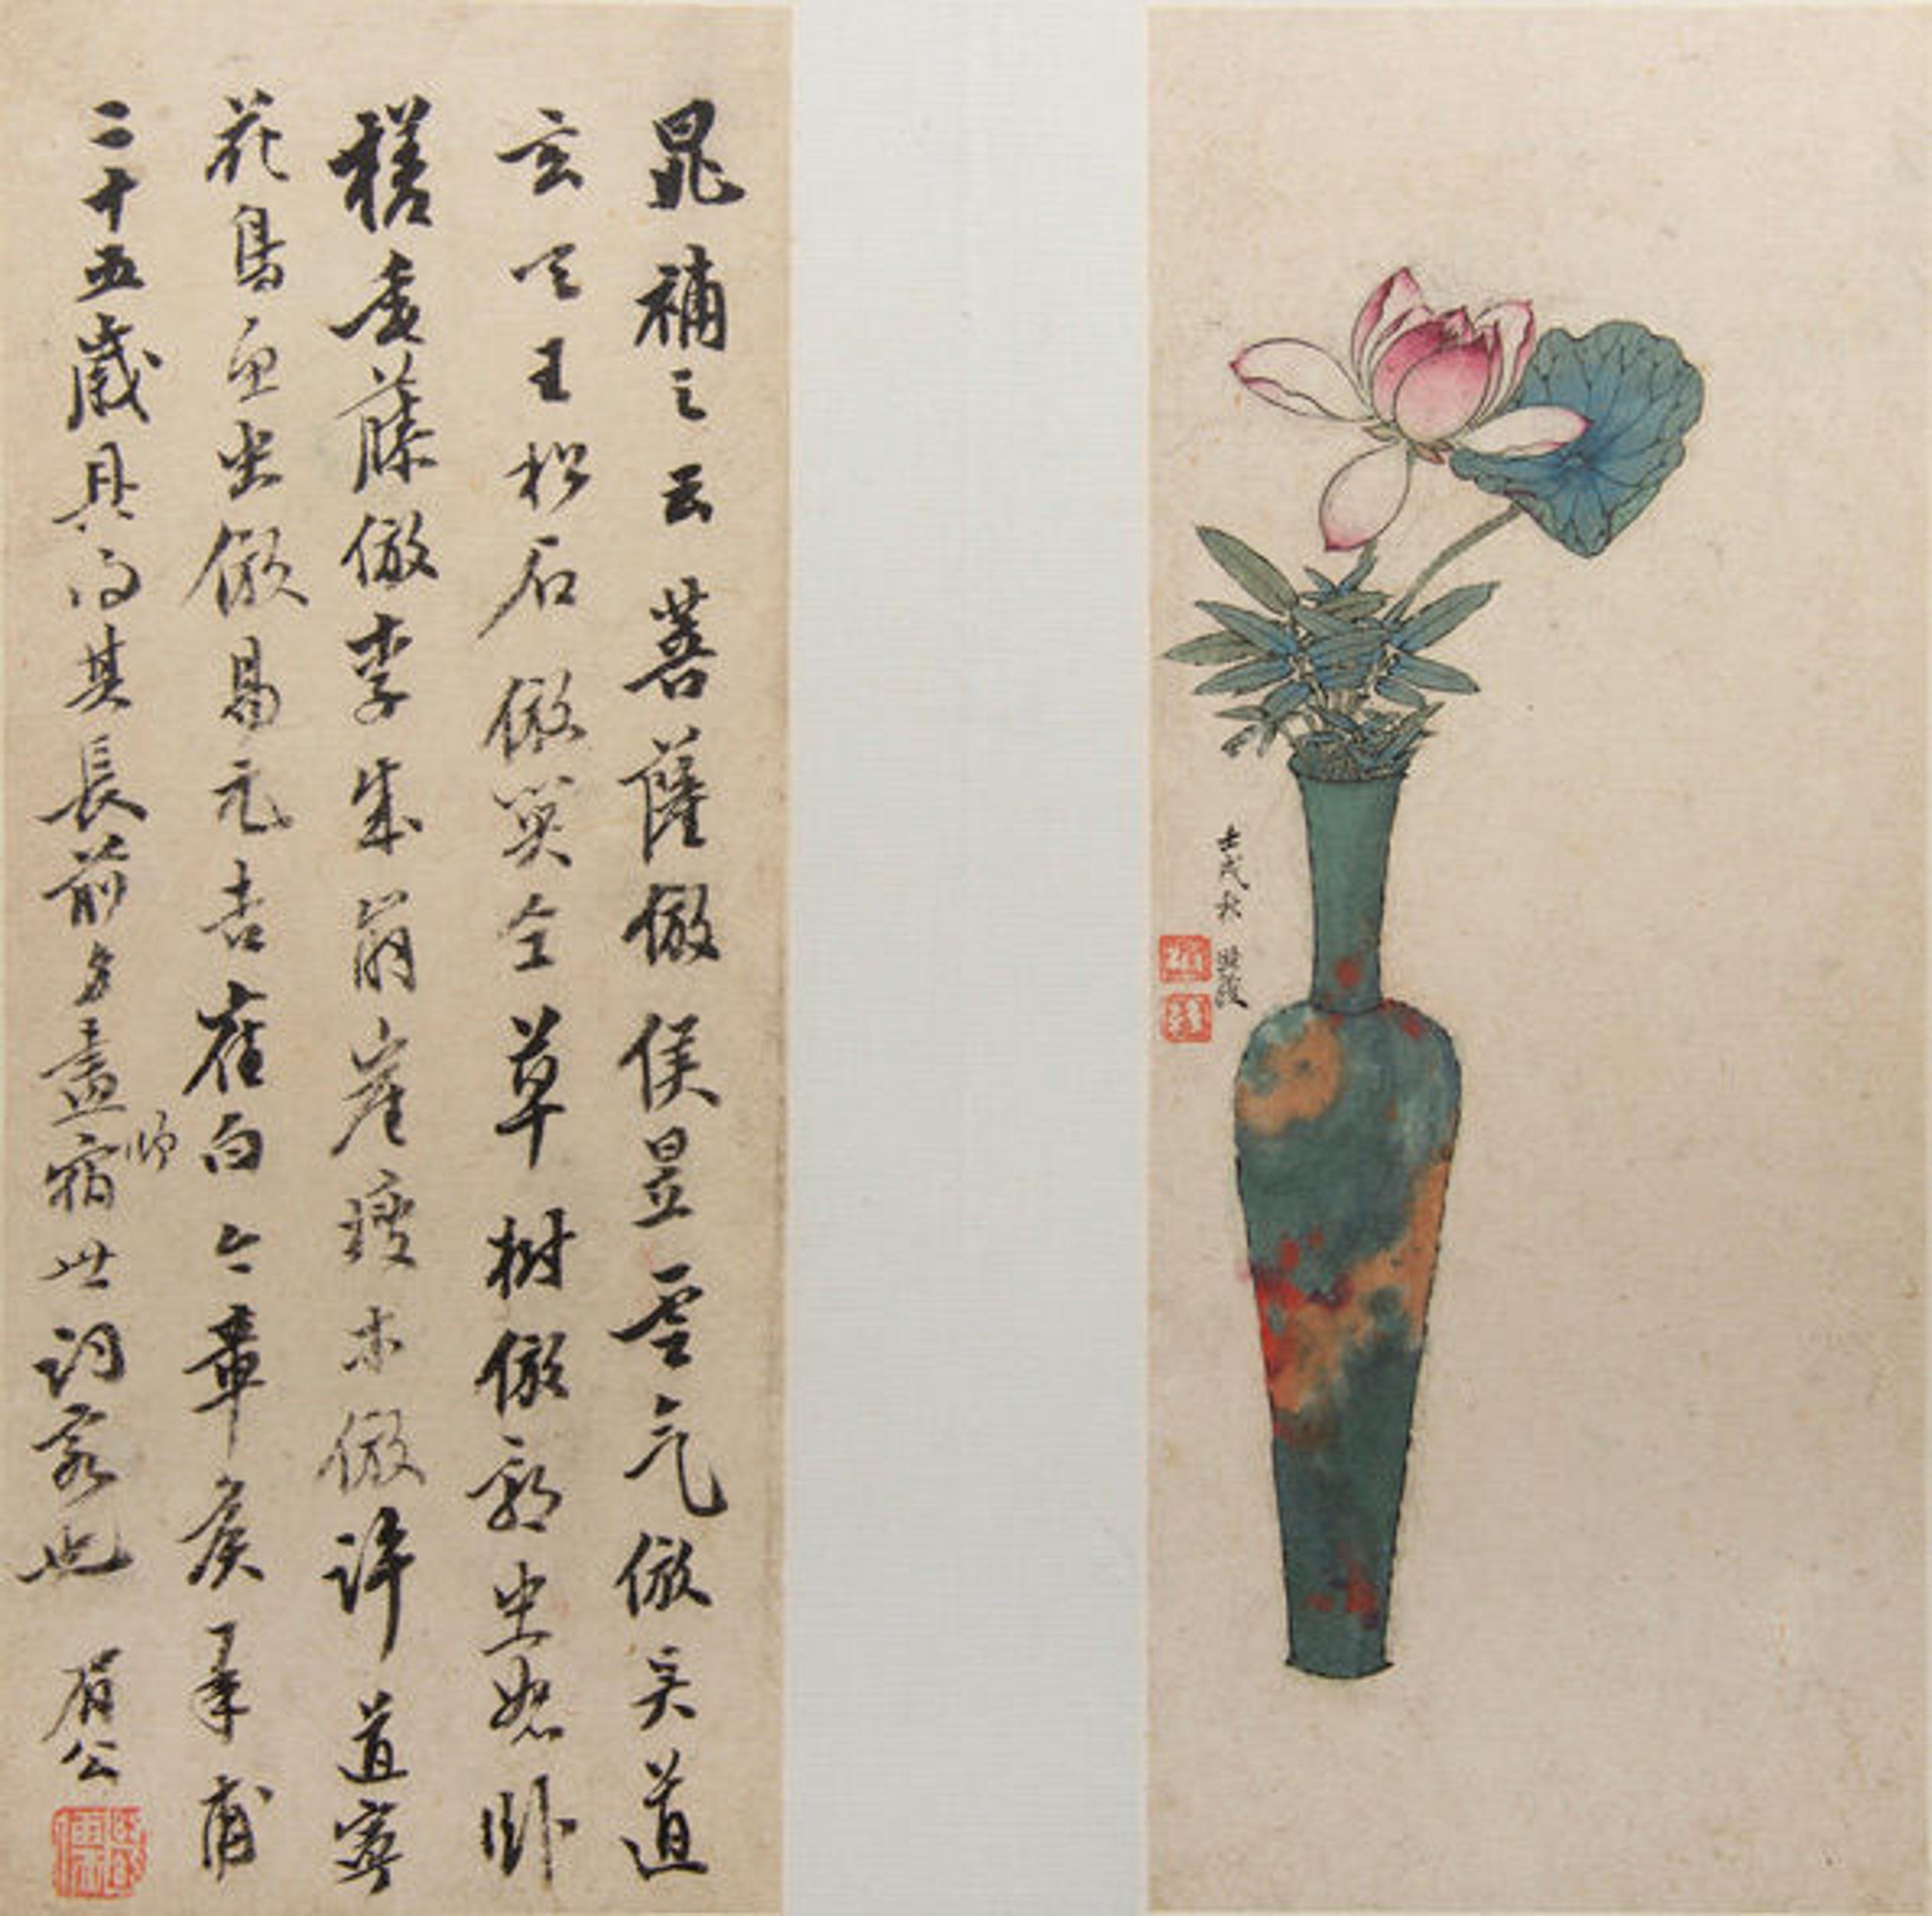 Chen Hongshou (1599–1652), Lotus and Bamboo in a Vase, dated 1622